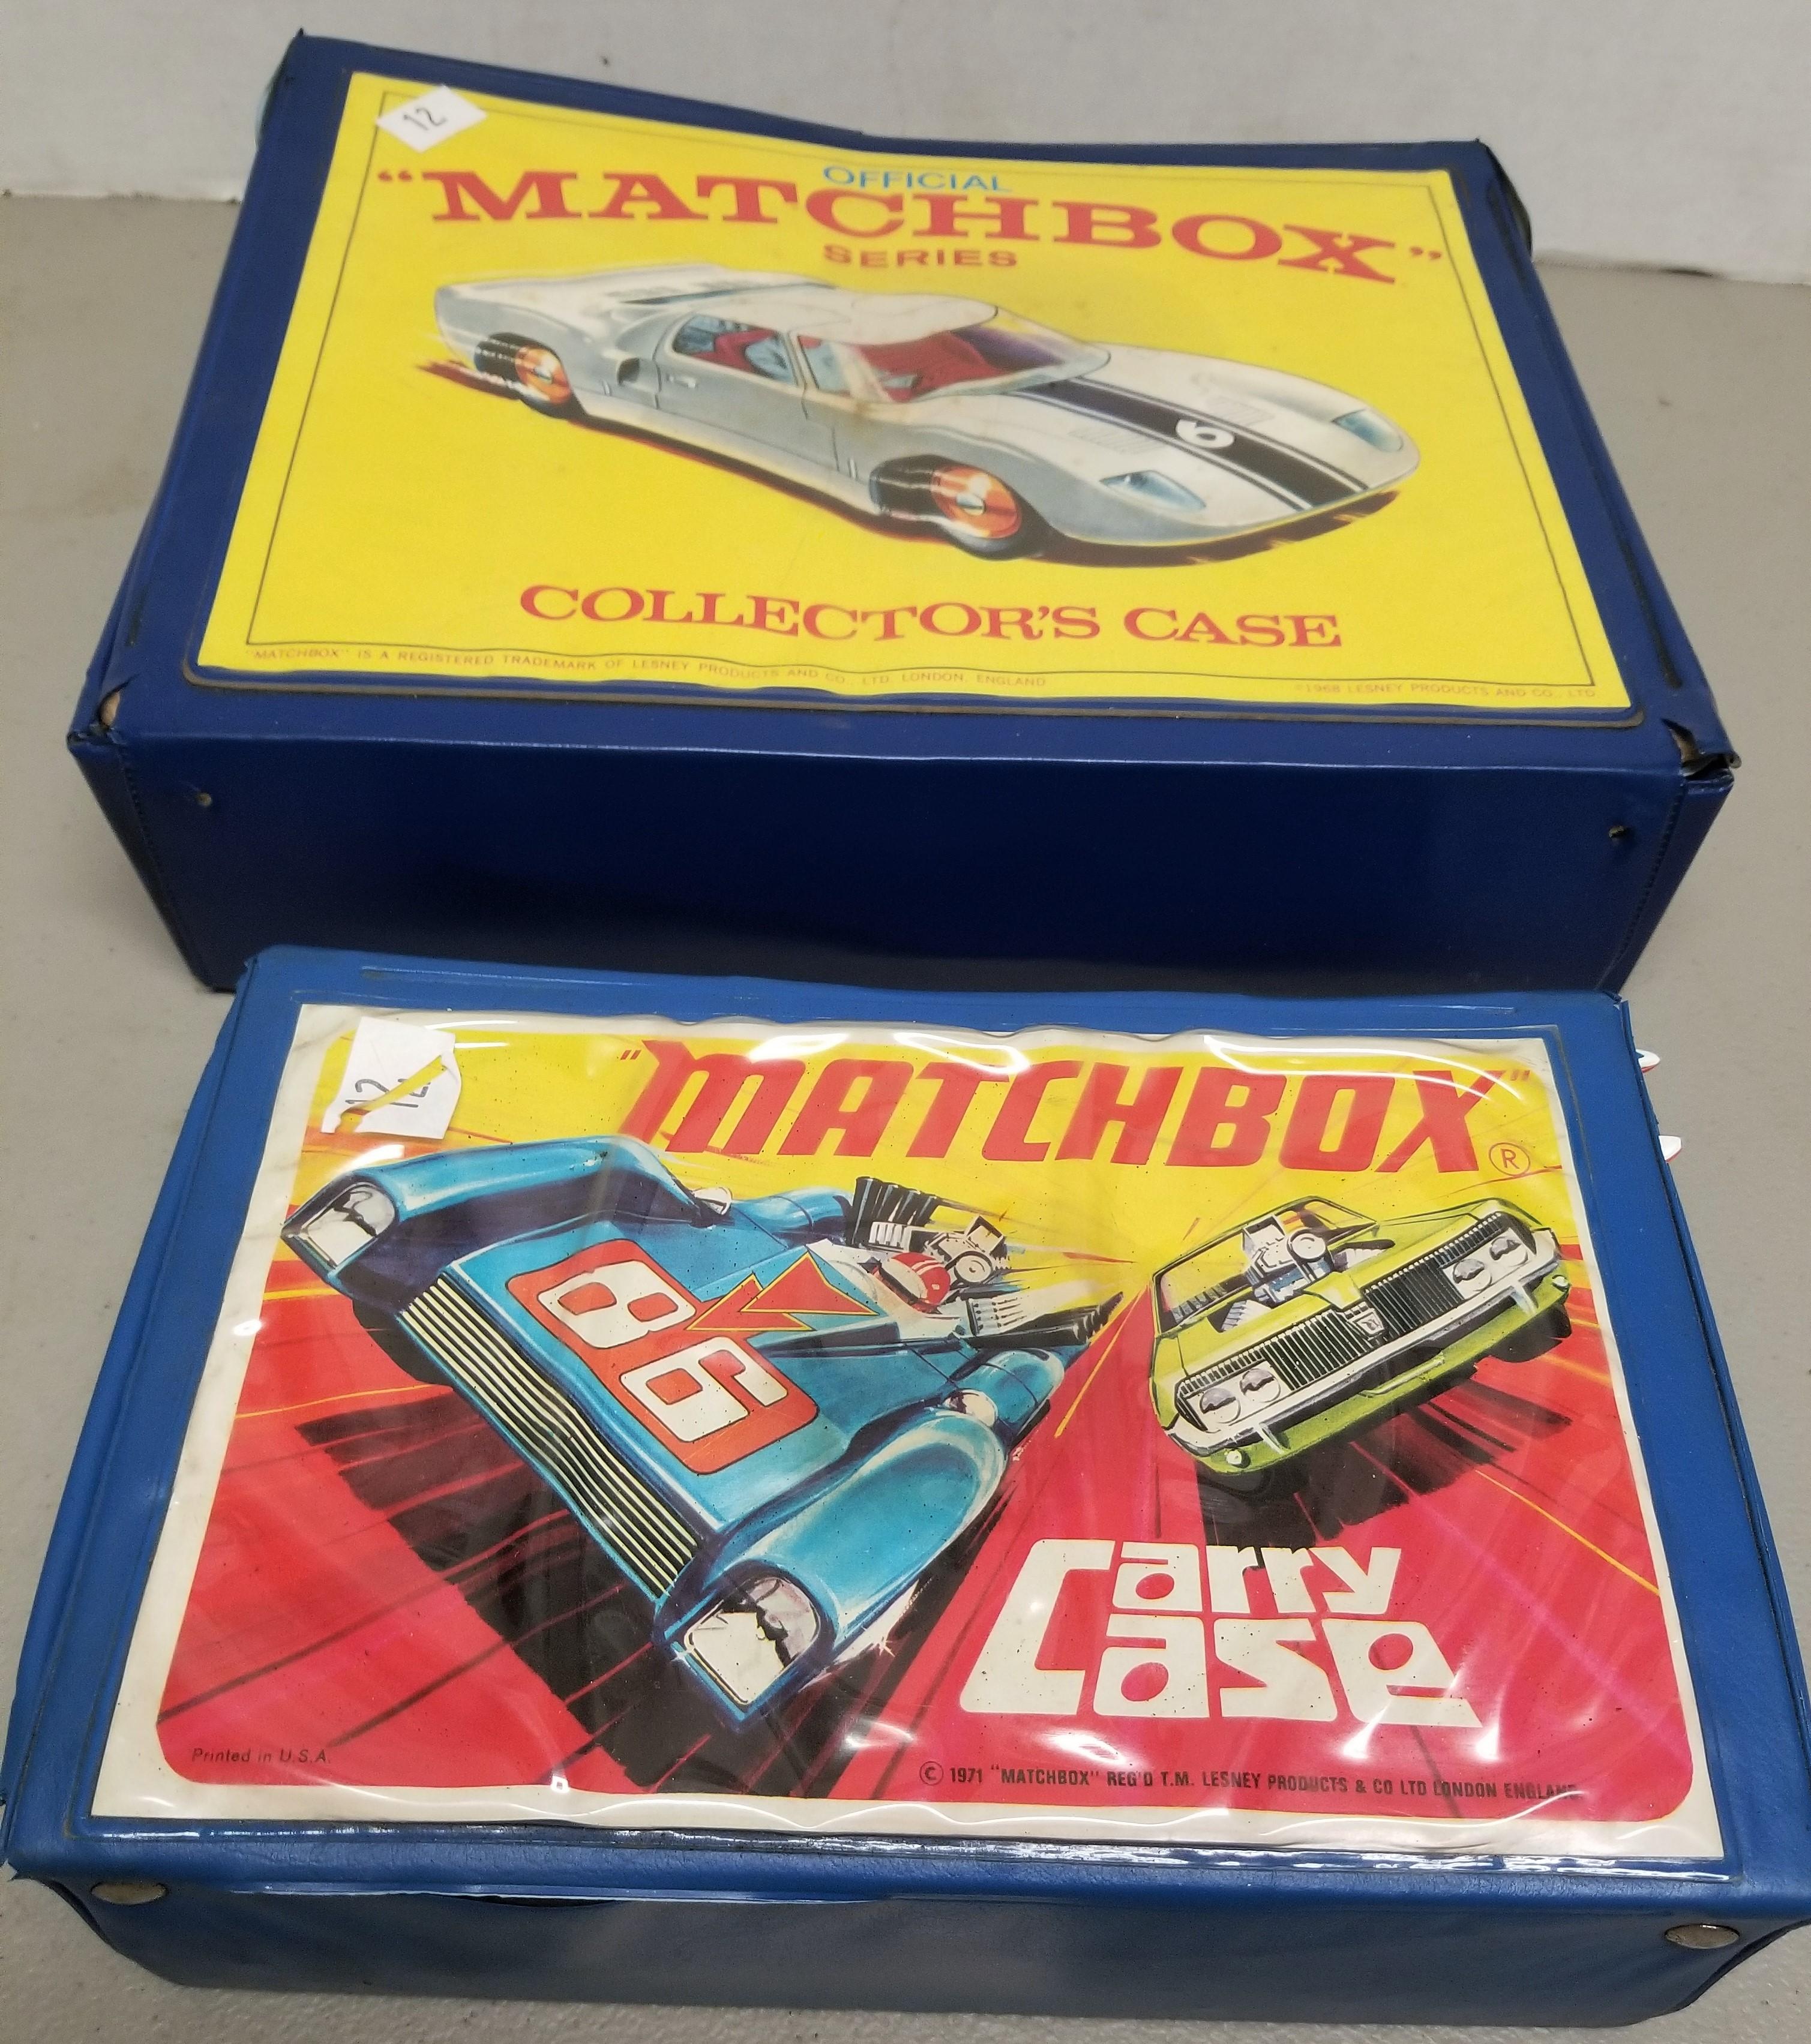 Pair of Vintage Matchbox Carrying Cases W/ Cars